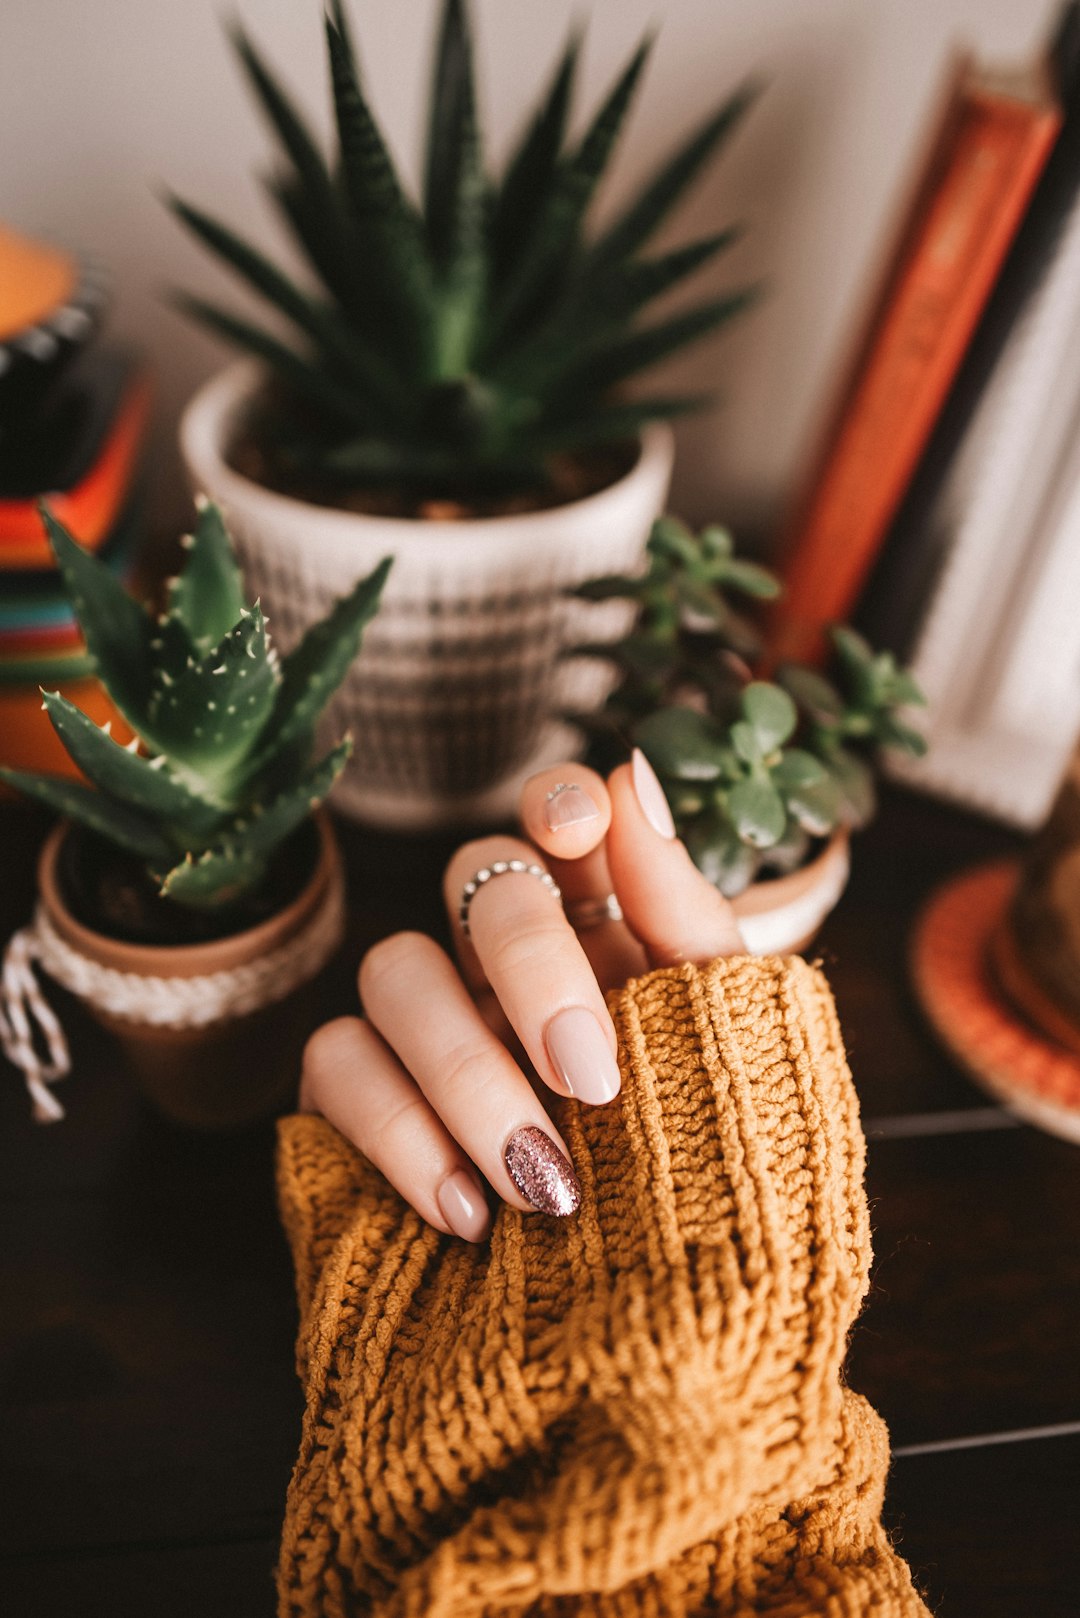 10 Nail Care Tips to Keep Your Semi Cured Gel Nail Wraps Looking Great